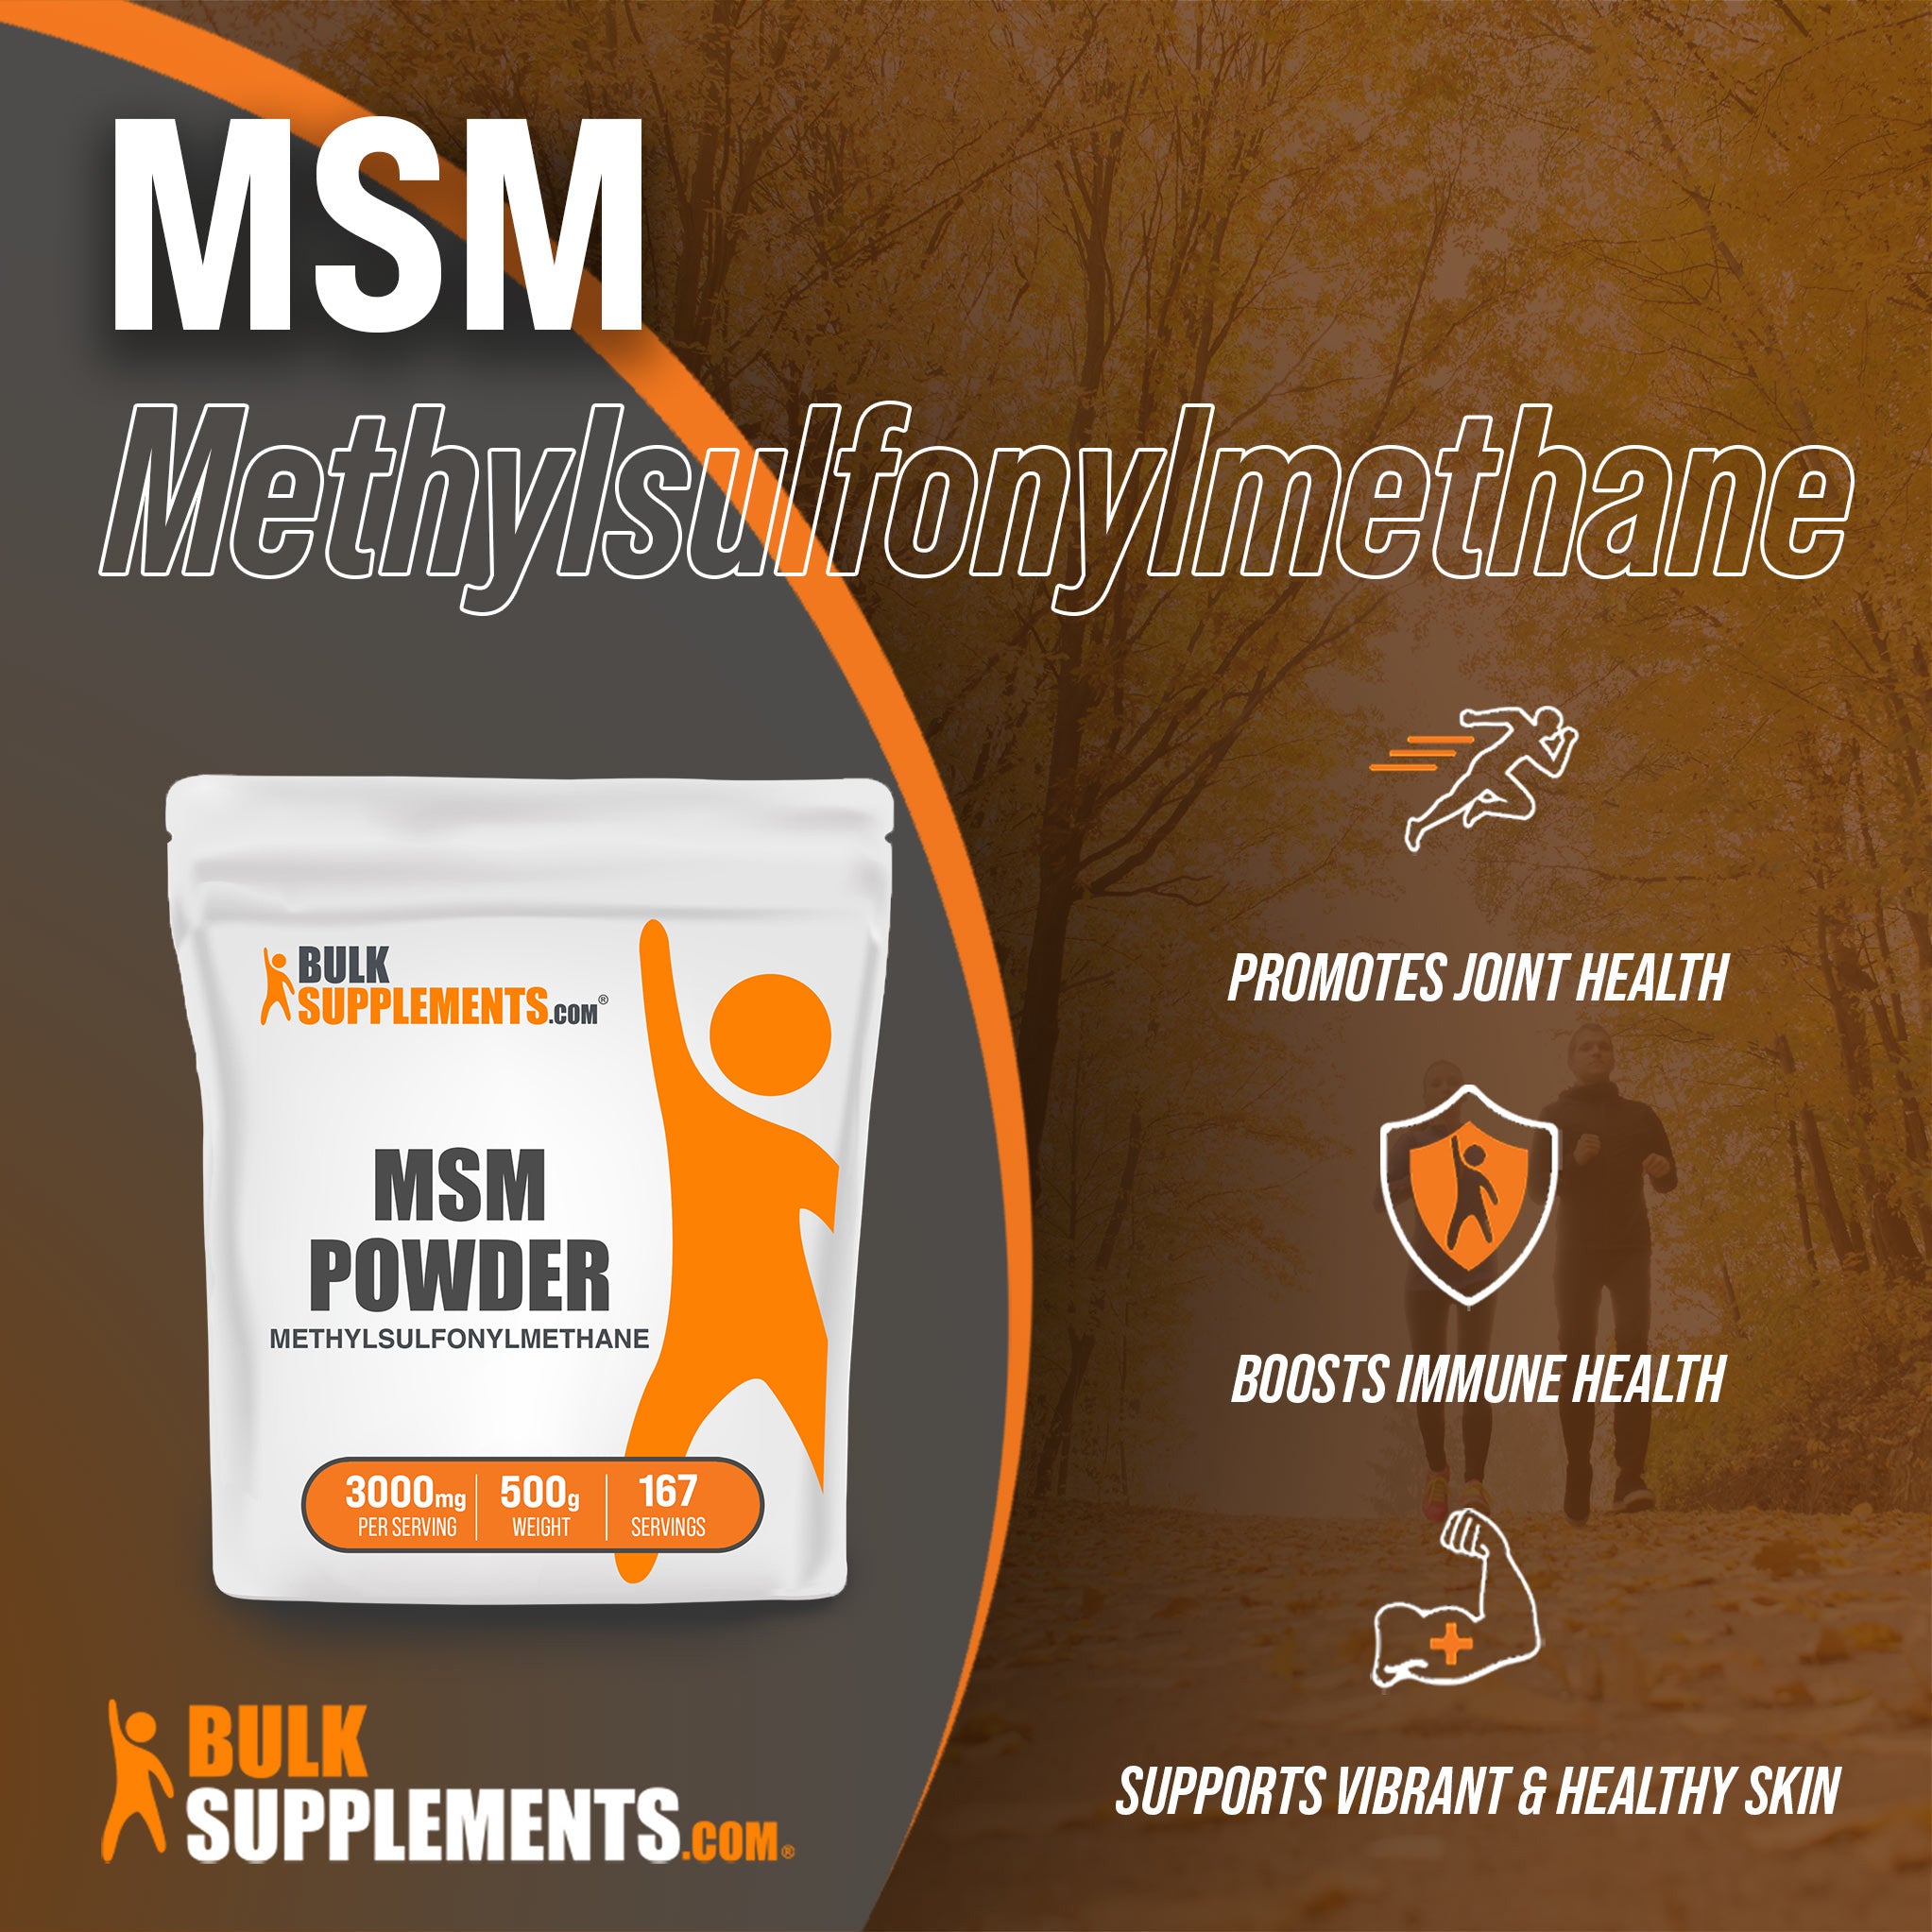 Benefits of MSM: promotes joint health, boosts immune health, supports vibrant and healthy skin